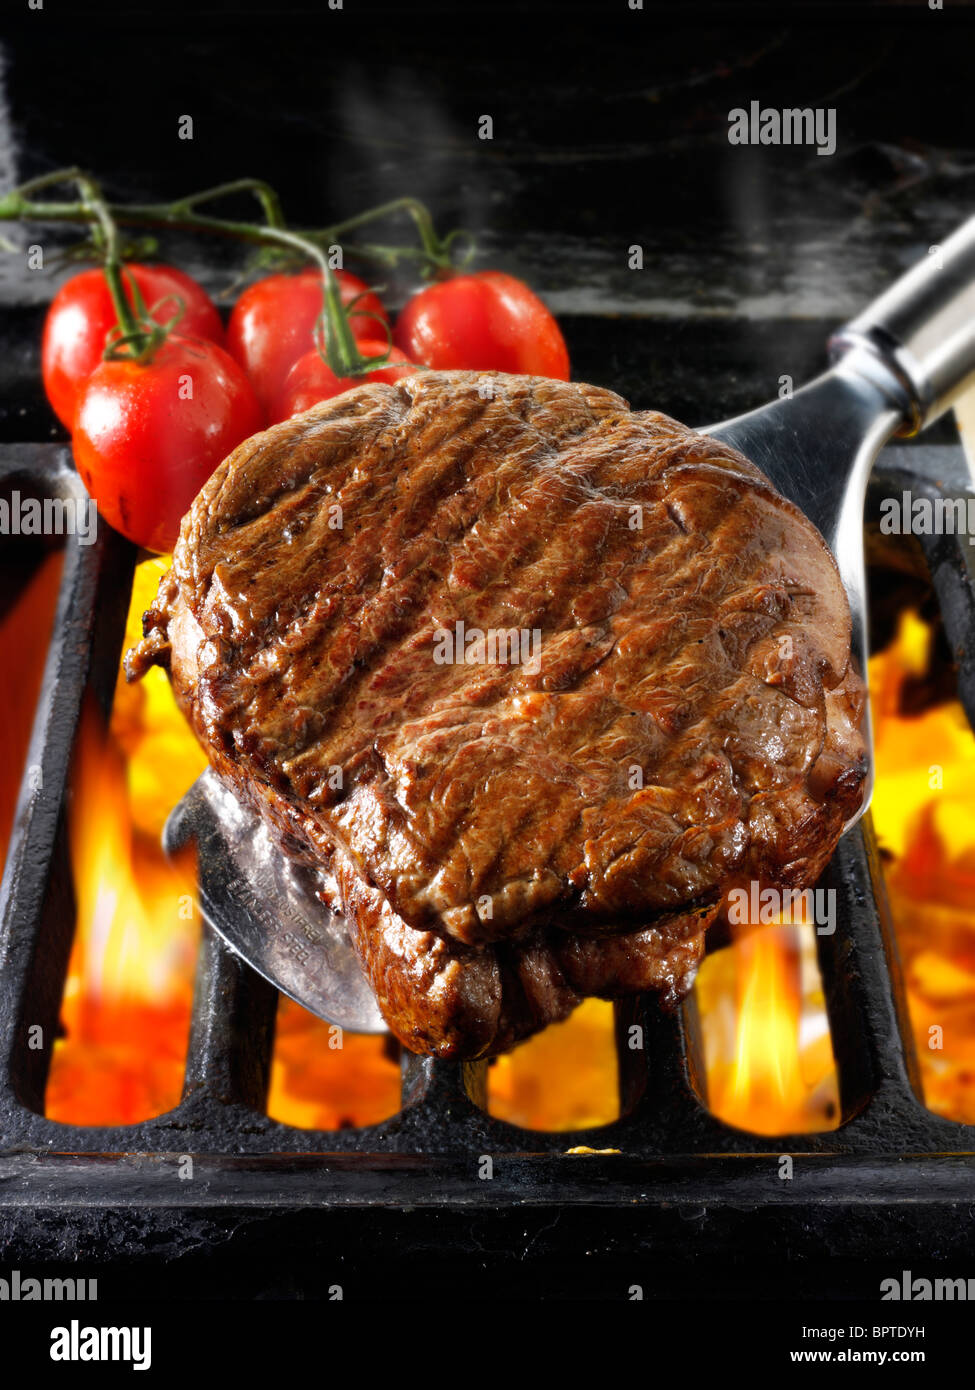 Beef fillet steaks & tomatoes being cooked on a bbq. Meat food photos, pictures & images. Stock Photo